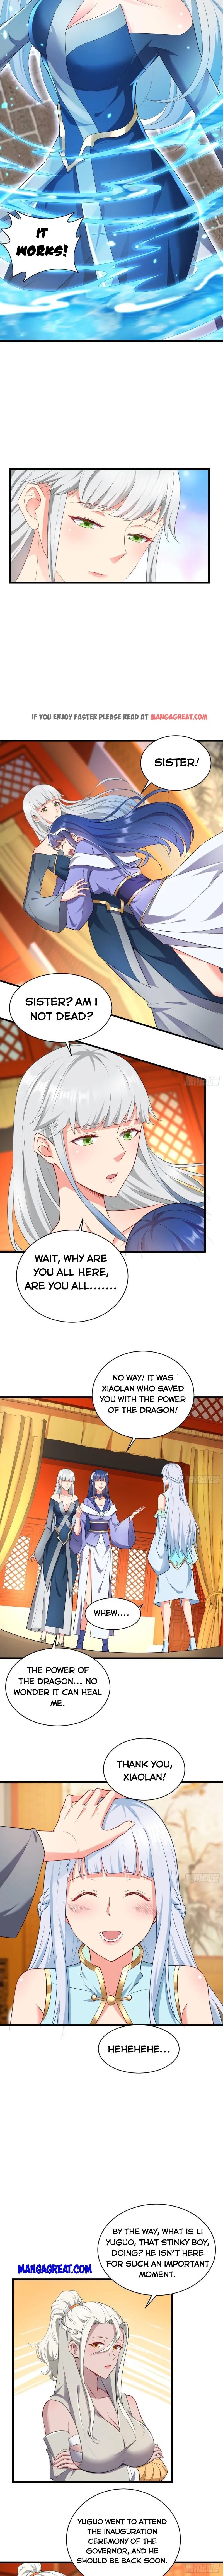 Forced to Become the Villain's Son-in-law Chapter 392 page 4